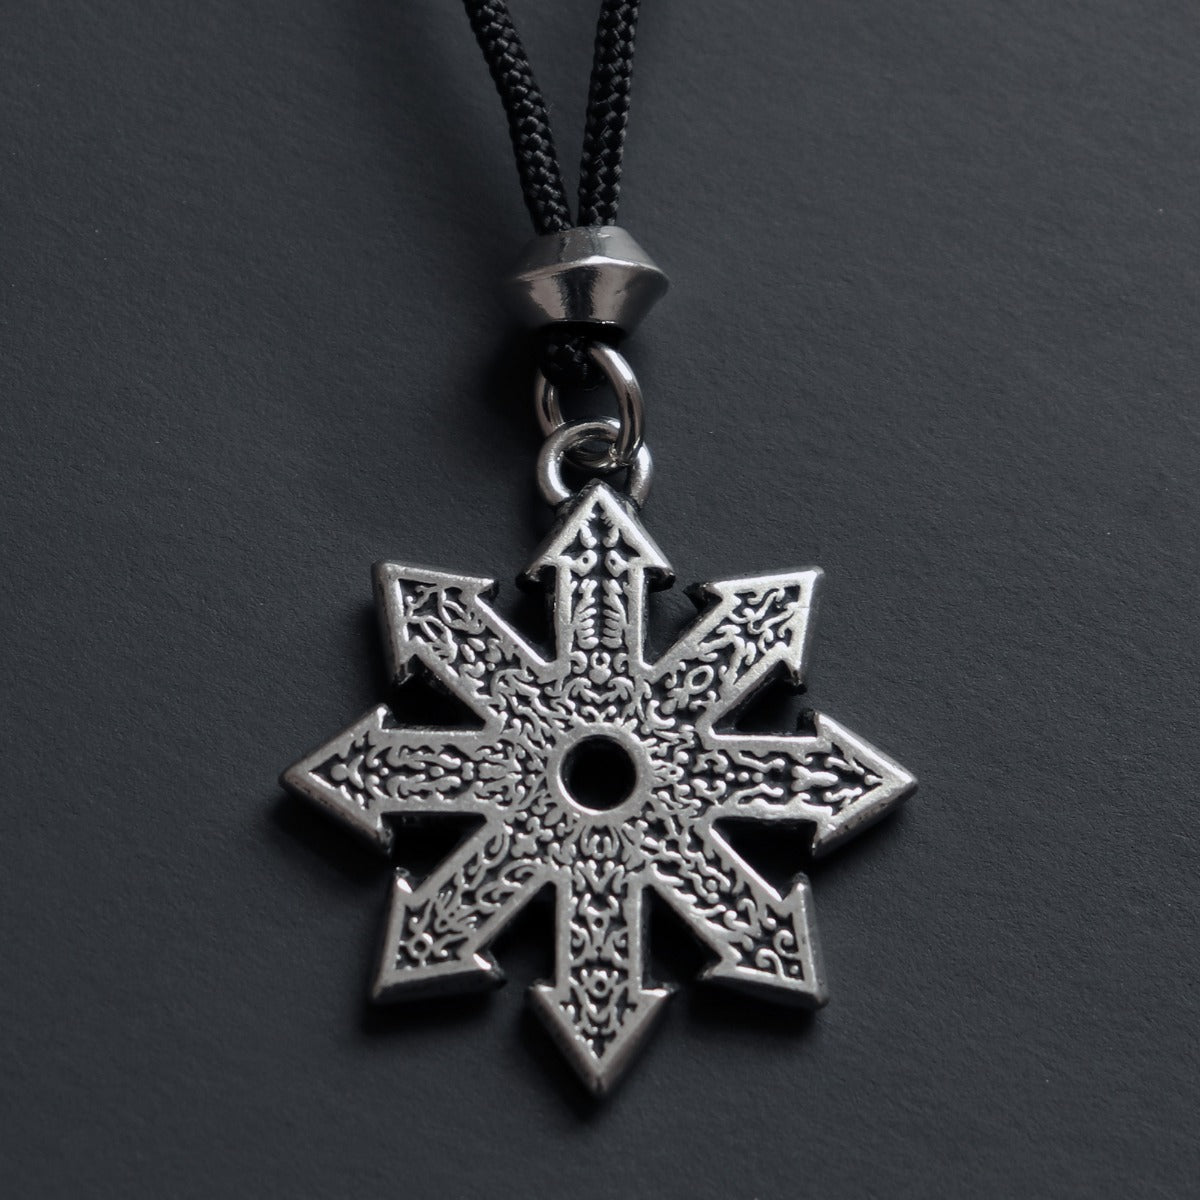 Star of Chaos Pendant - 13 Moons